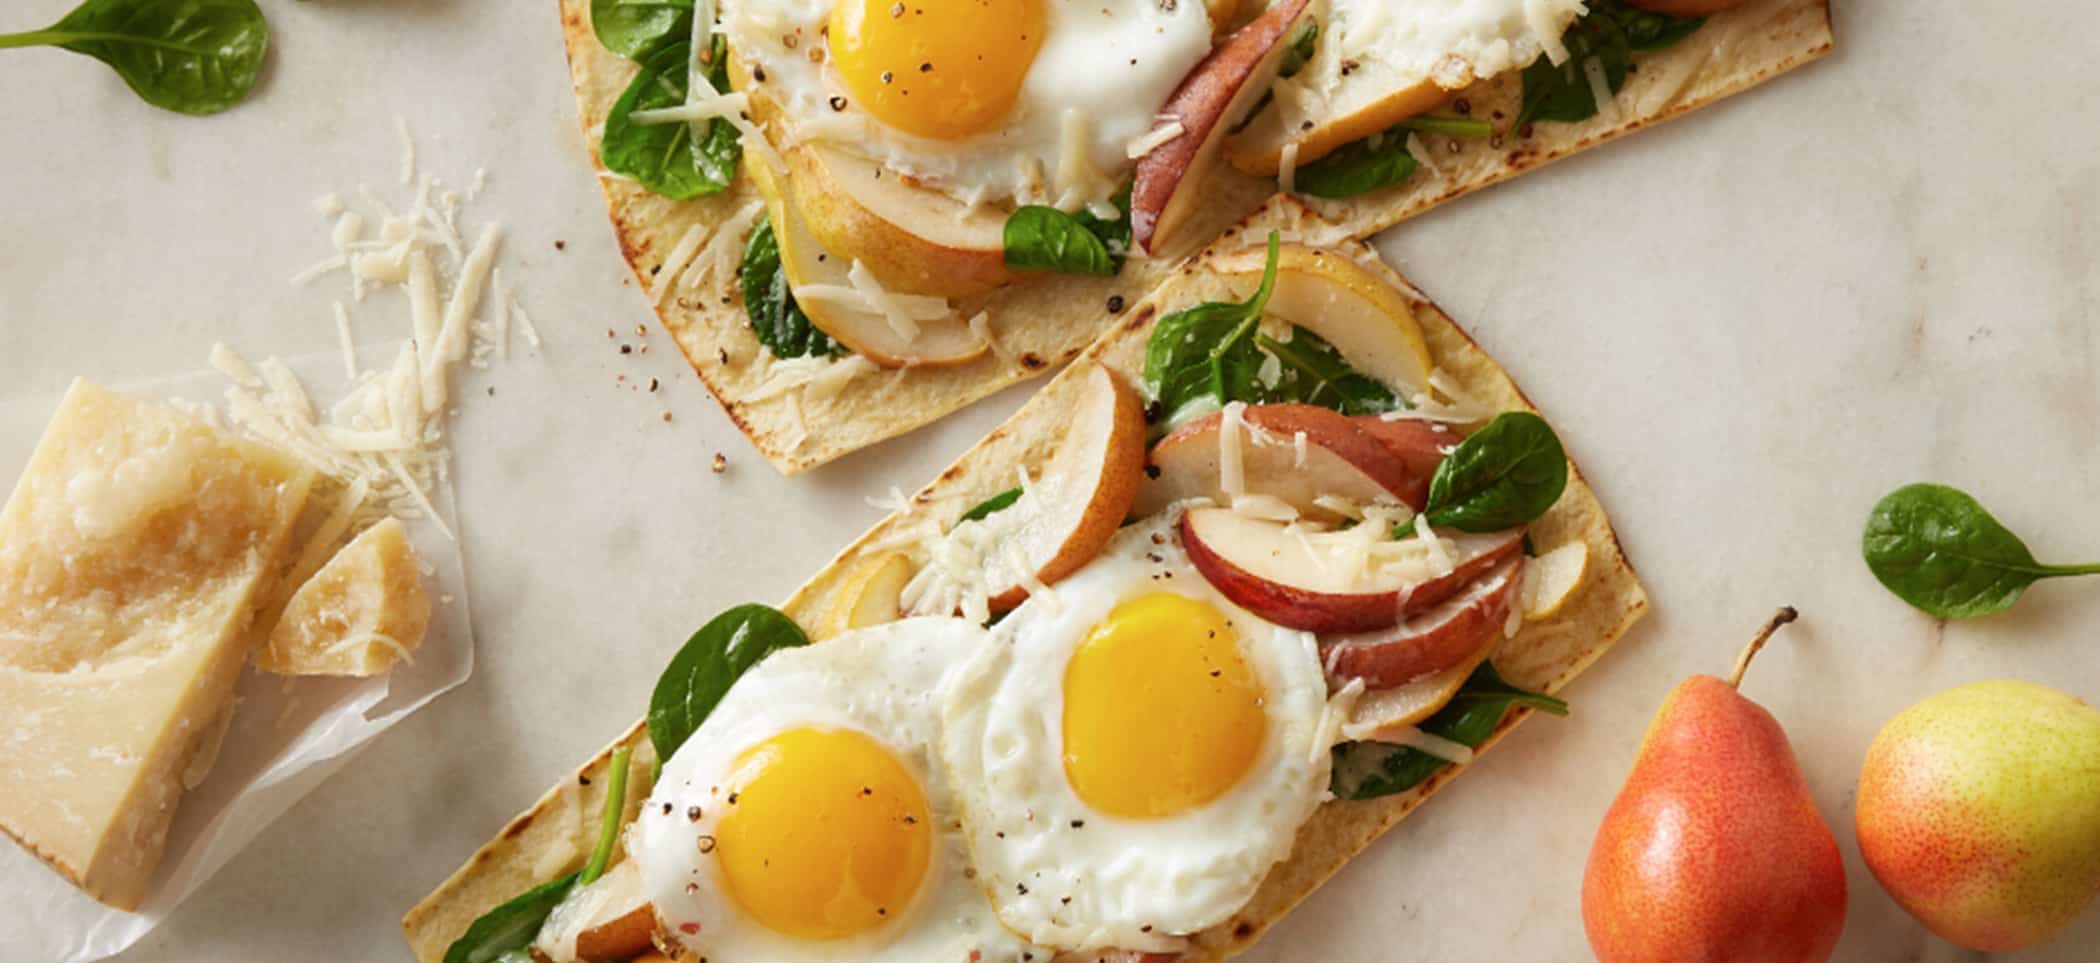 Pear Spinach and Egg Flatbread